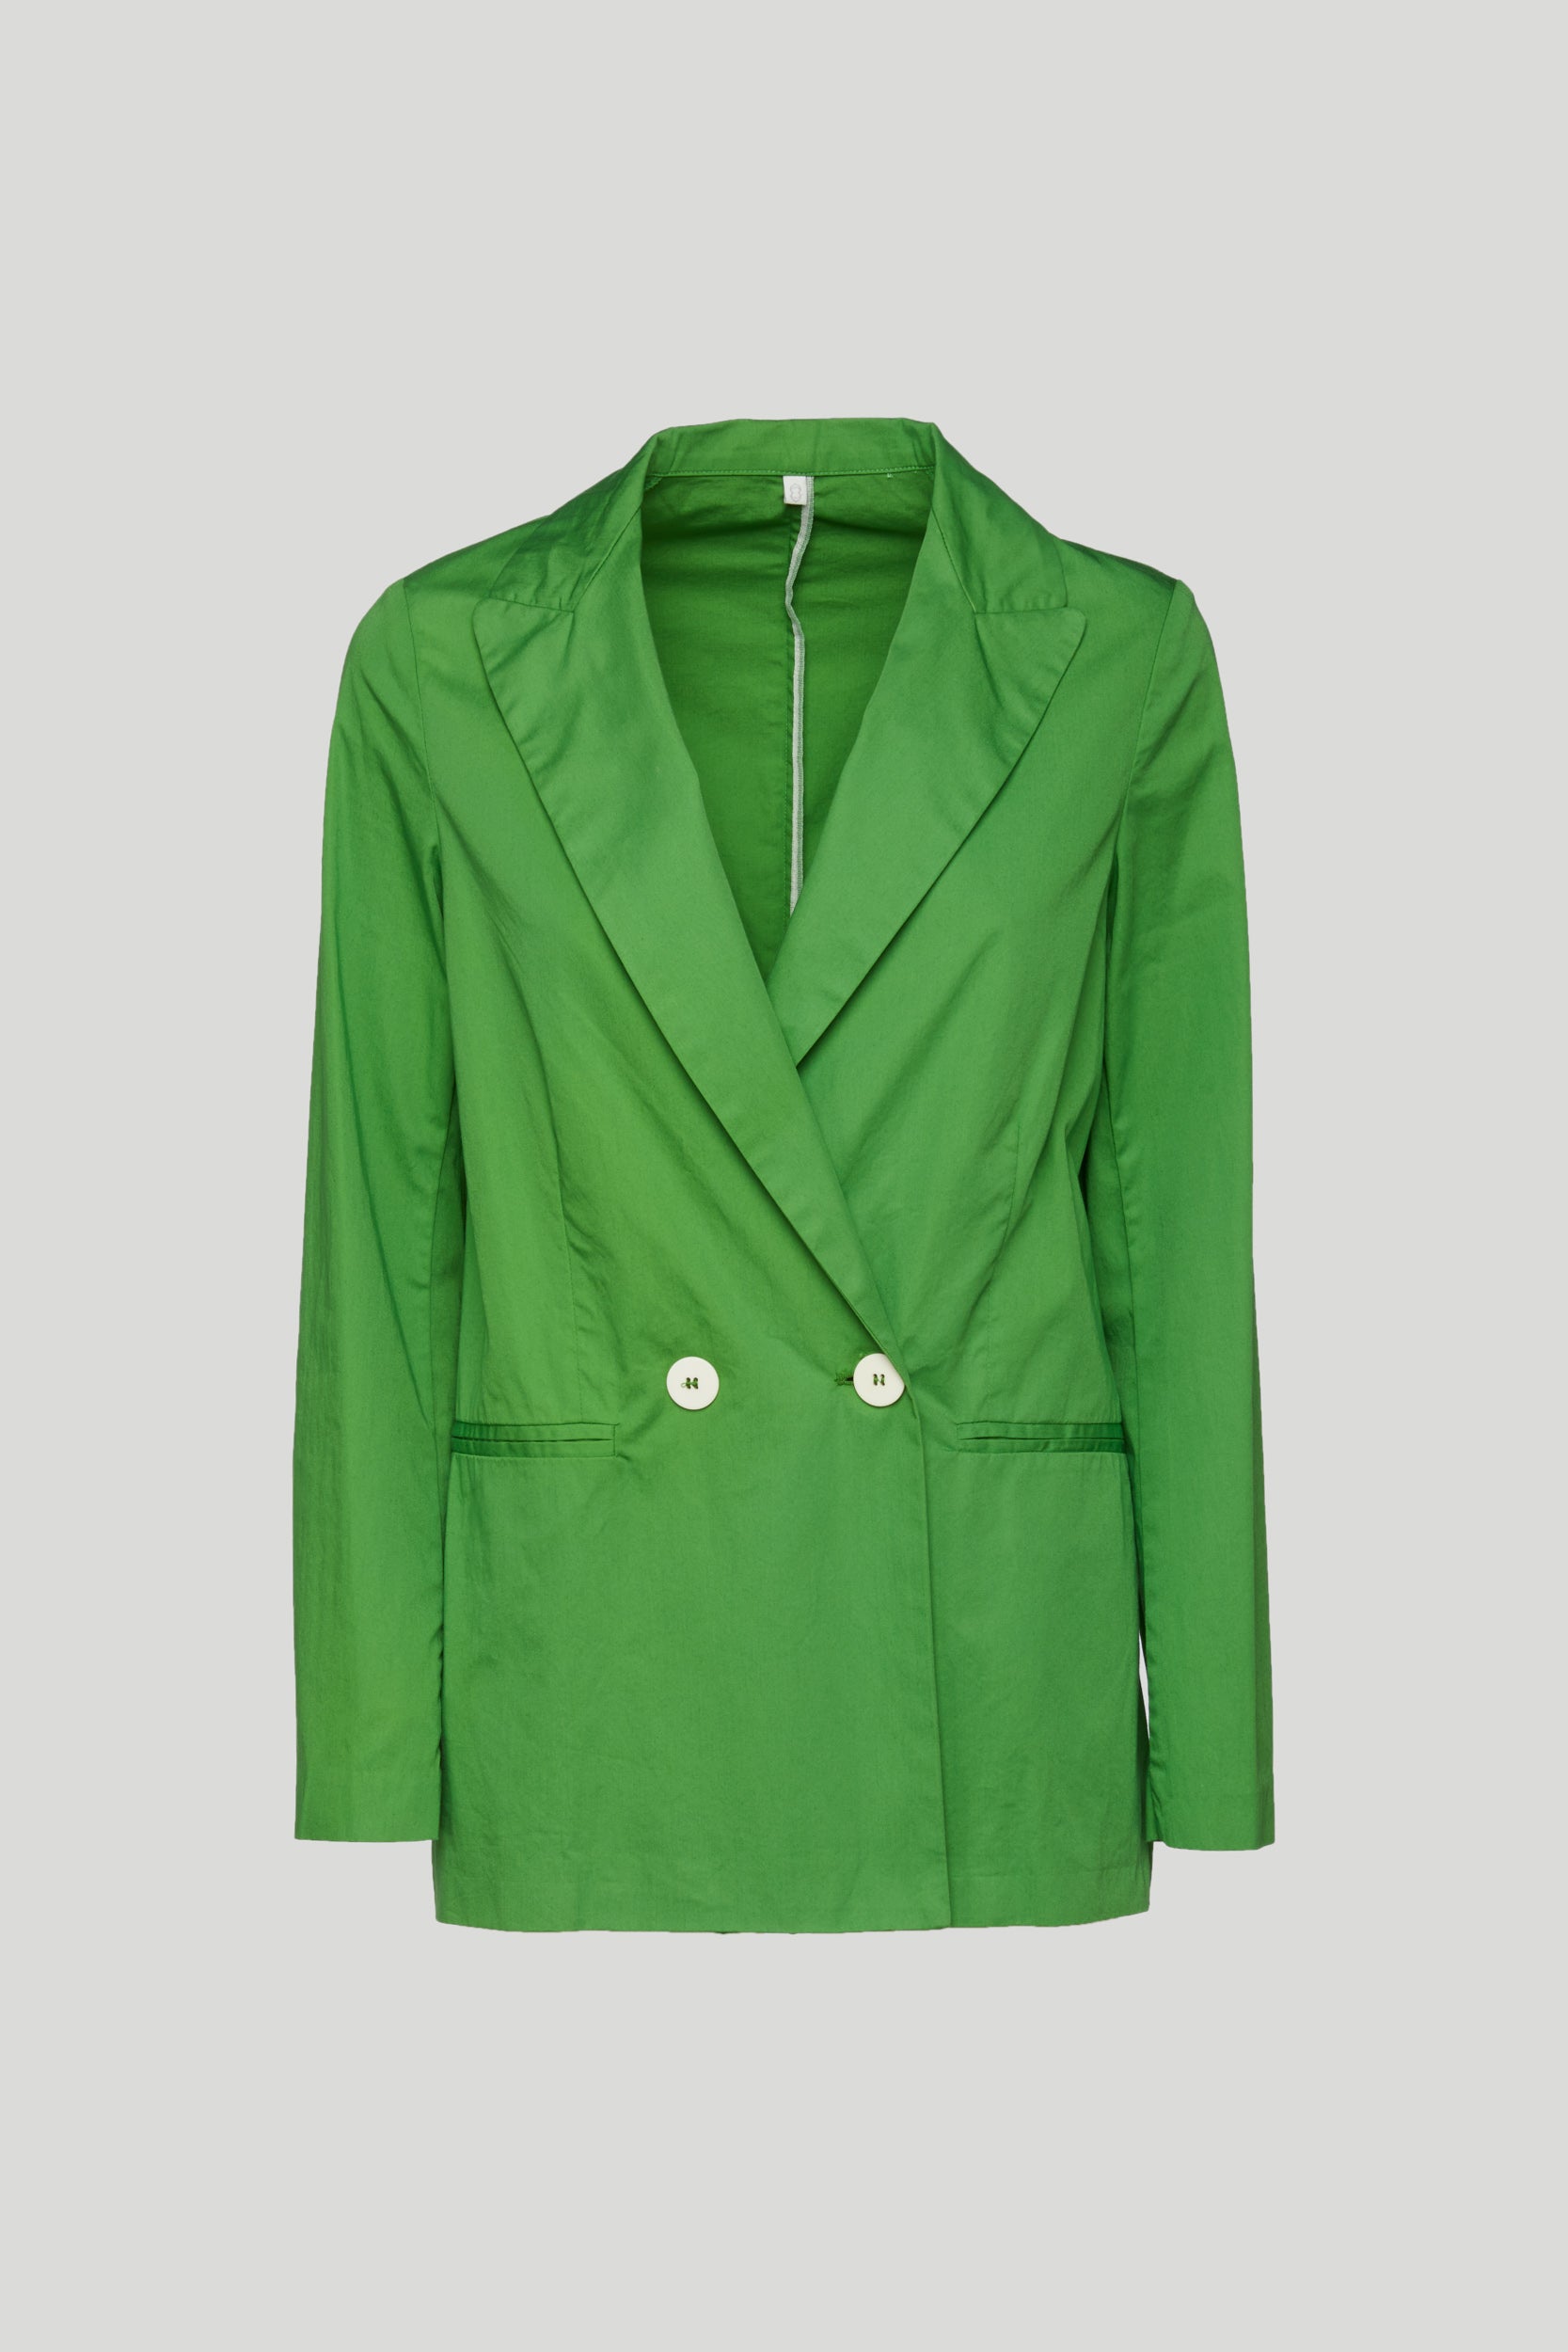 OTTOD'AME Green Double-Breasted Blazer